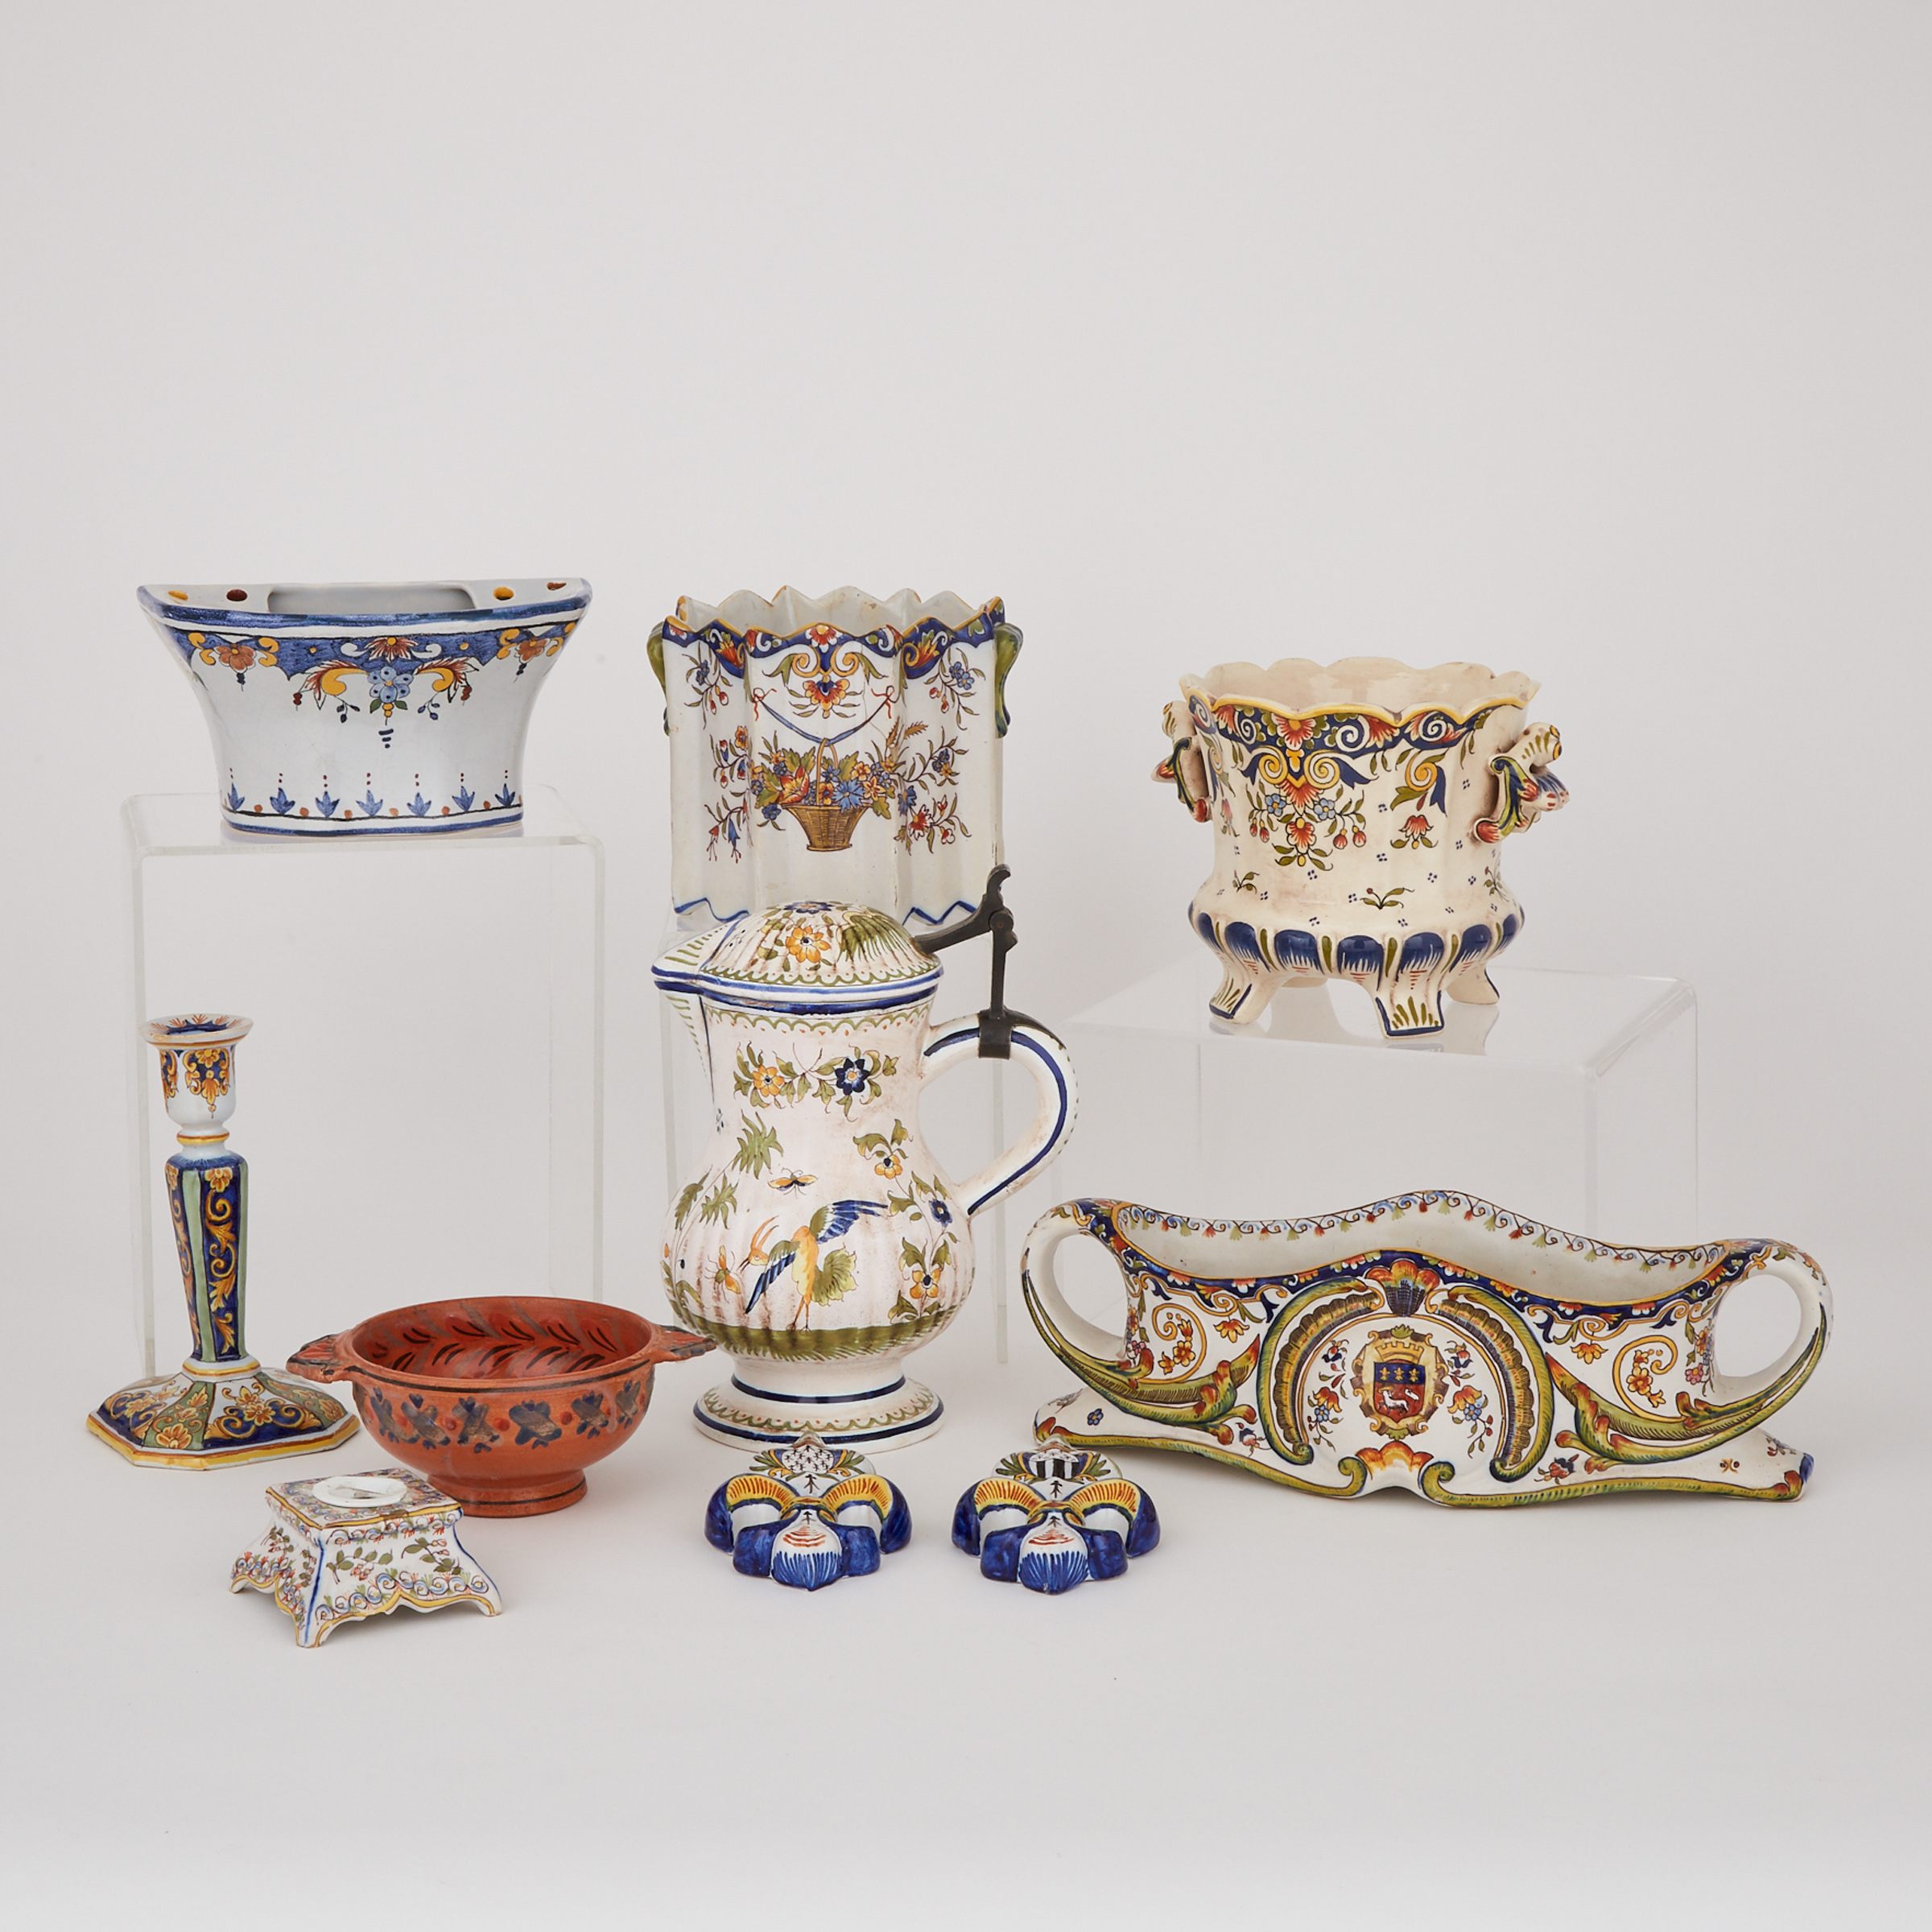 Group of French Faience, late 19th/20th century